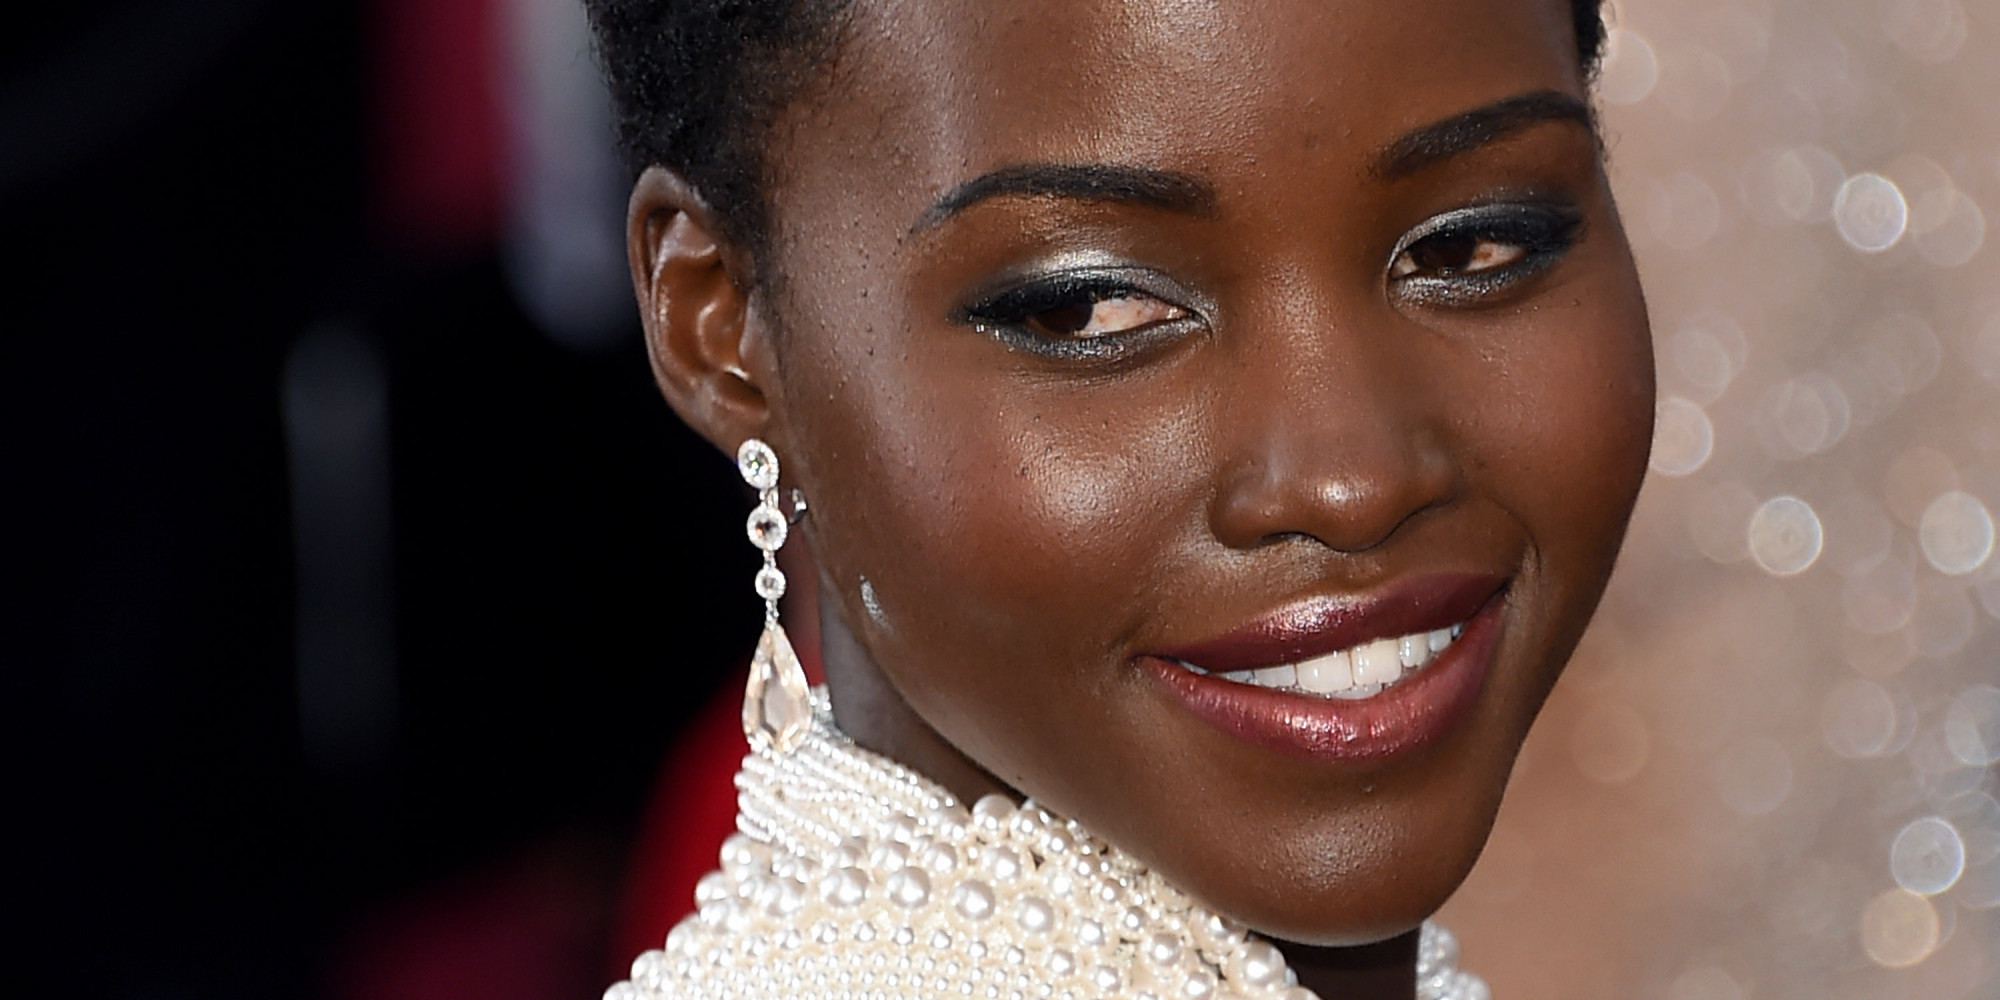 Heres The Problem With Calling Lupita Nyongo The New Face Of Beauty